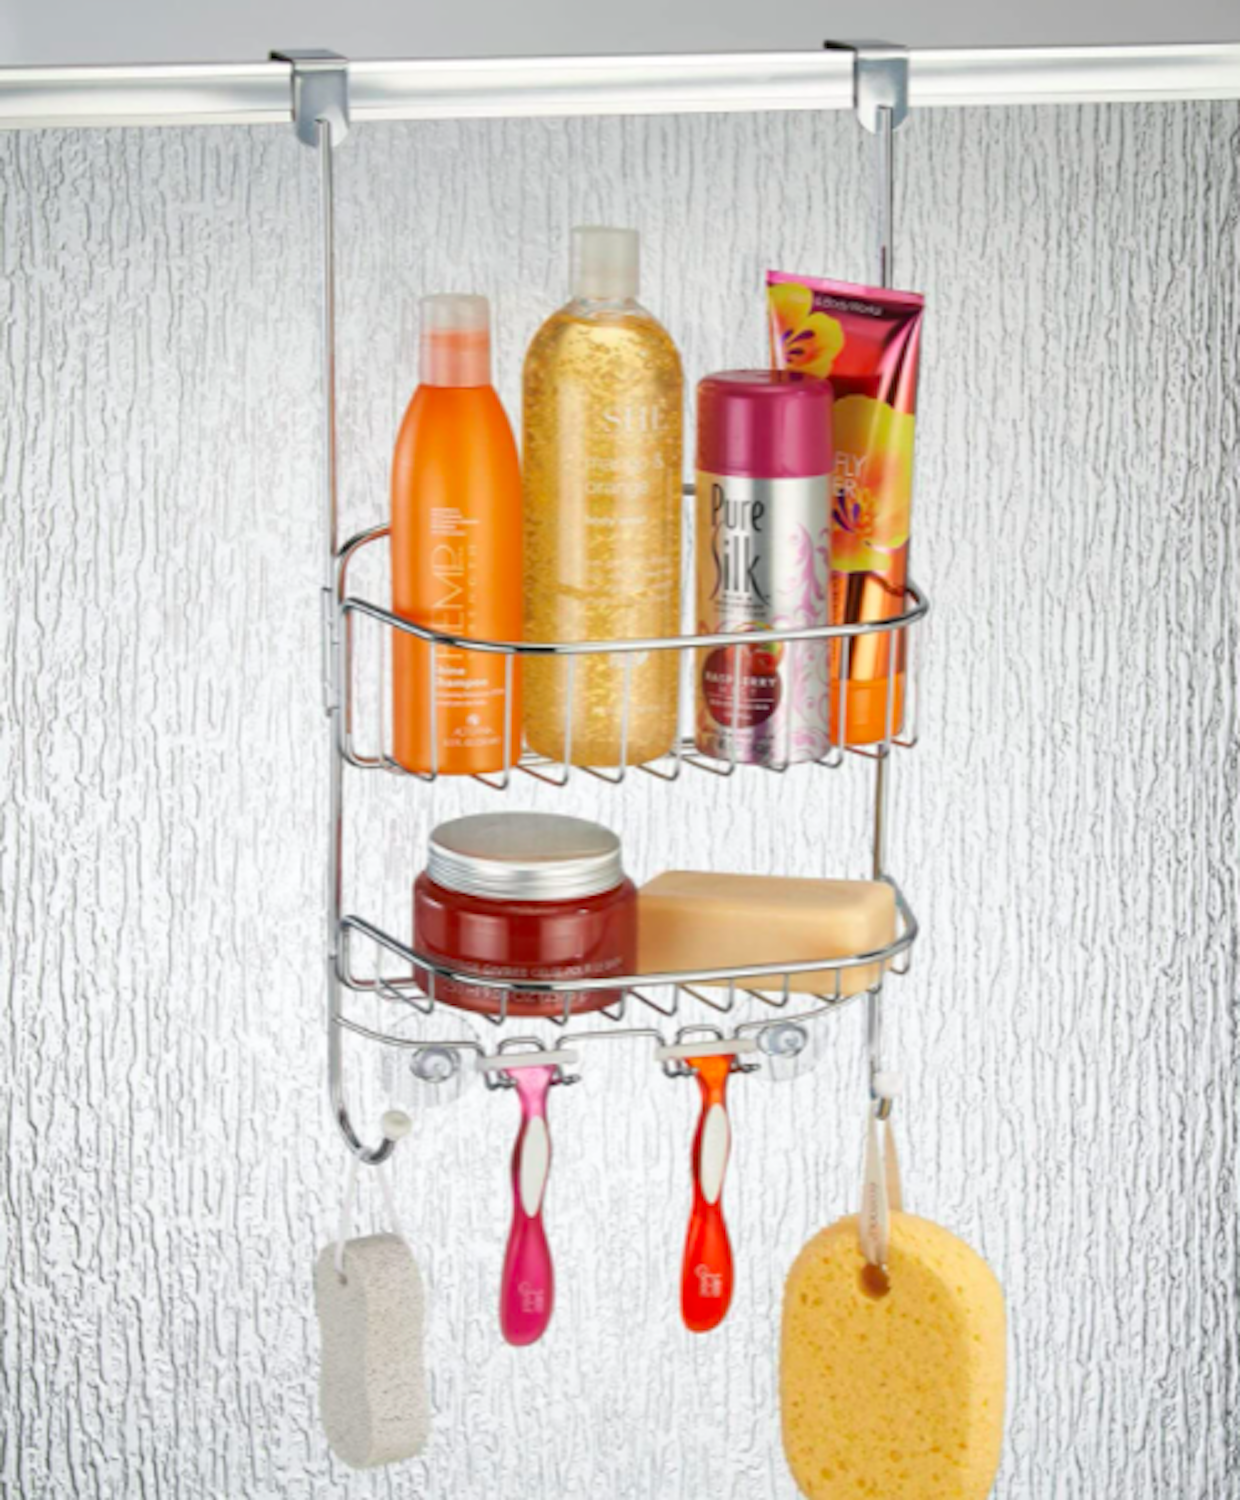 These Shower Organizers Is 'Actually Perfect' According to